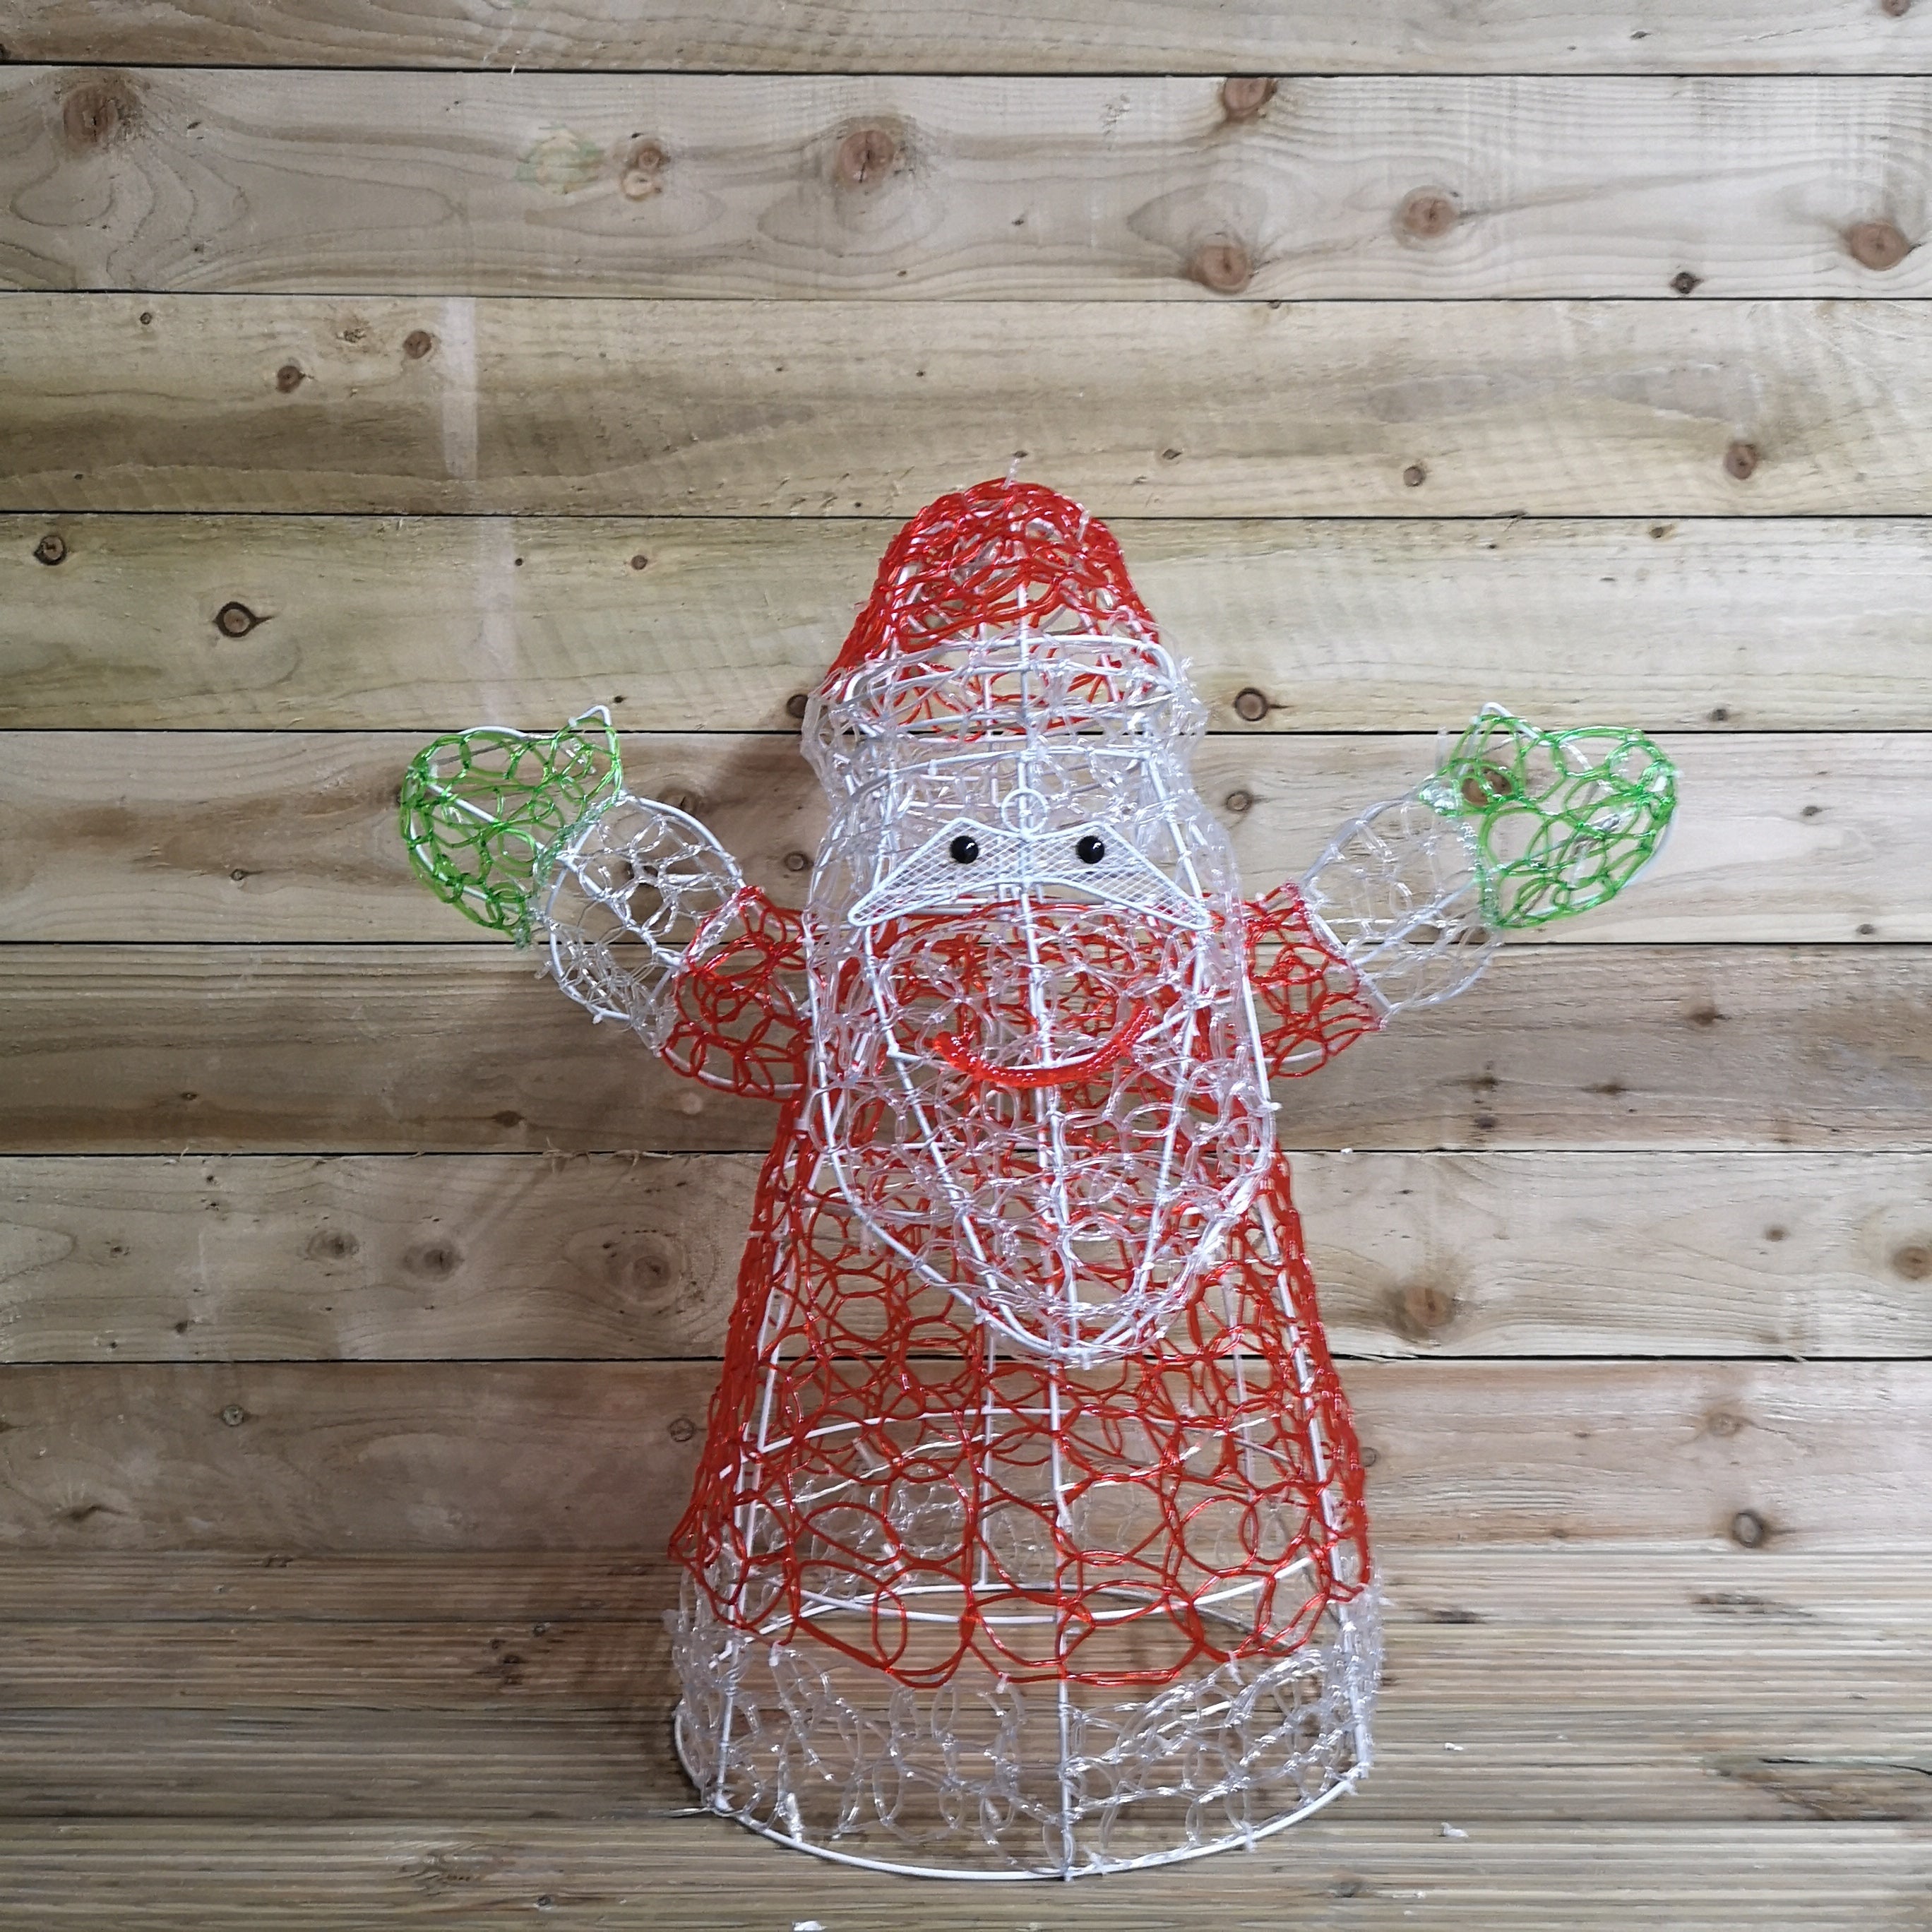 76cm Premier Christmas Soft Acrylic Indoor Outdoor Santa with 96 White LEDs